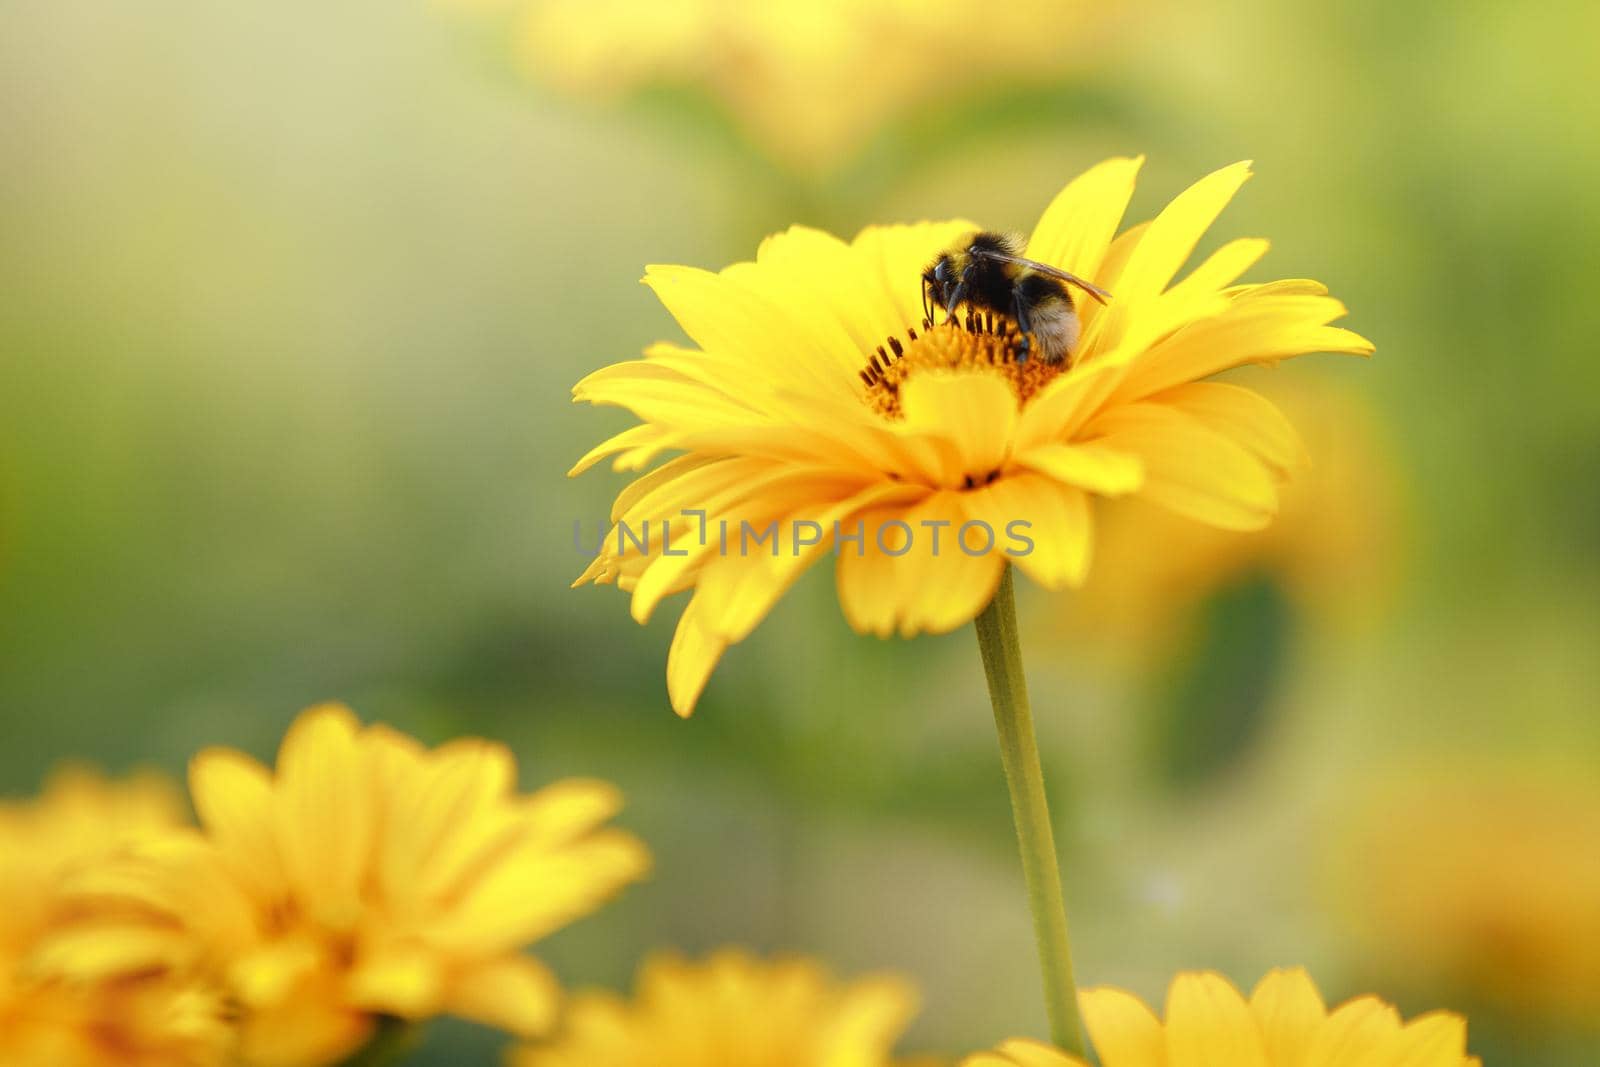 Yellow echinacea flowers in full bloom, and bumblebee collect honey on the petal. by Lincikas